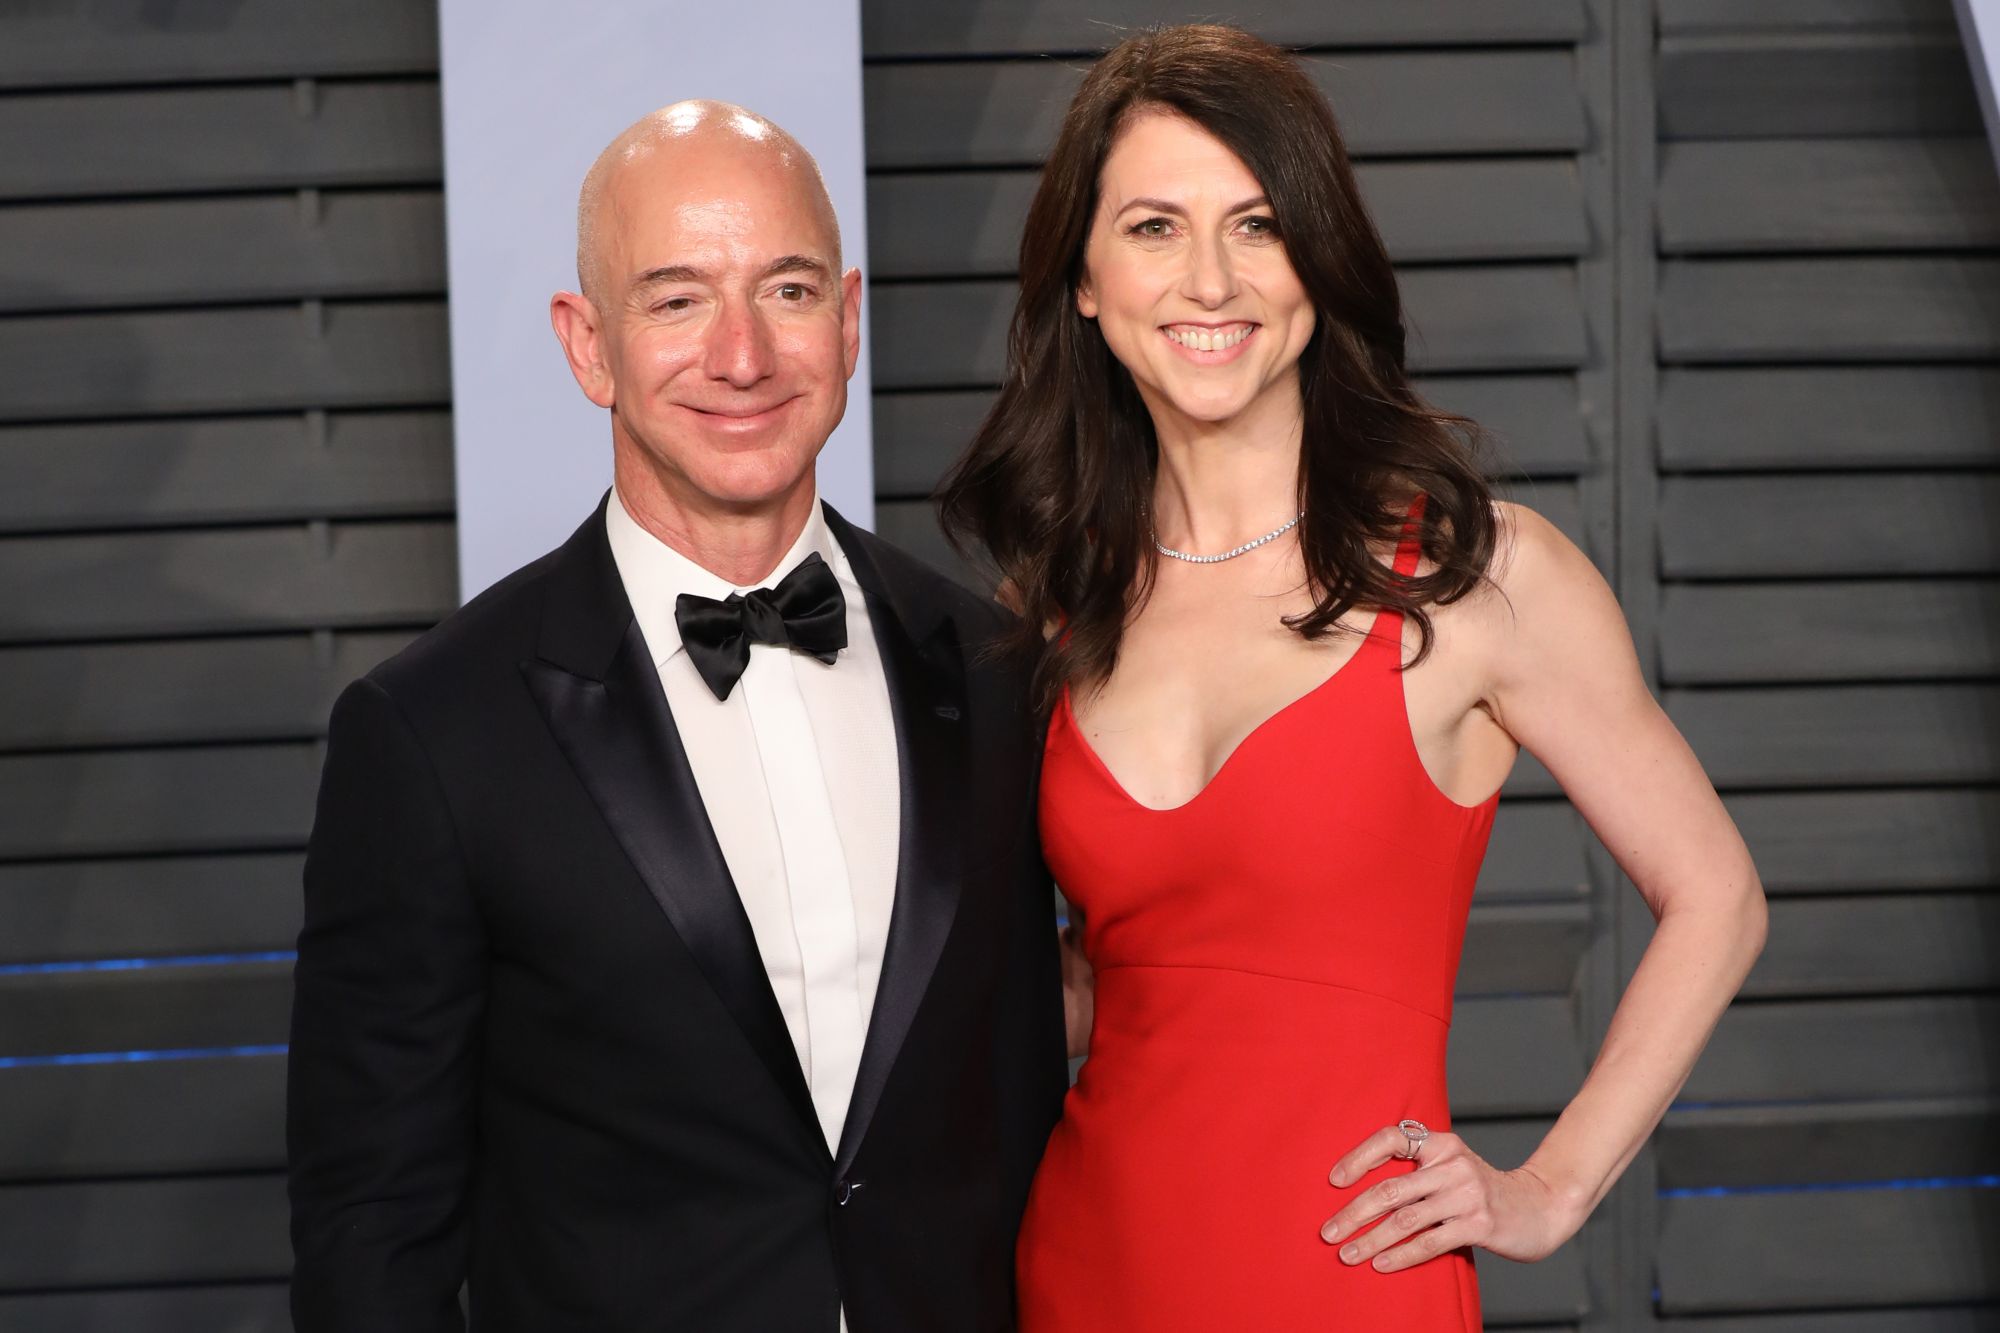 BEVERLY HILLS, CALIFORNIA - MARCH 04: Jeff Bezos (L) and MacKenzie Bezos attends the 2018 Vanity Fair Oscar Party hosted by Radhika Jones at Wallis Annenberg Center for the Performing Arts on March 04, 2018 in Beverly Hills, California. (Photo by Toni Anne Barson/Getty Images)